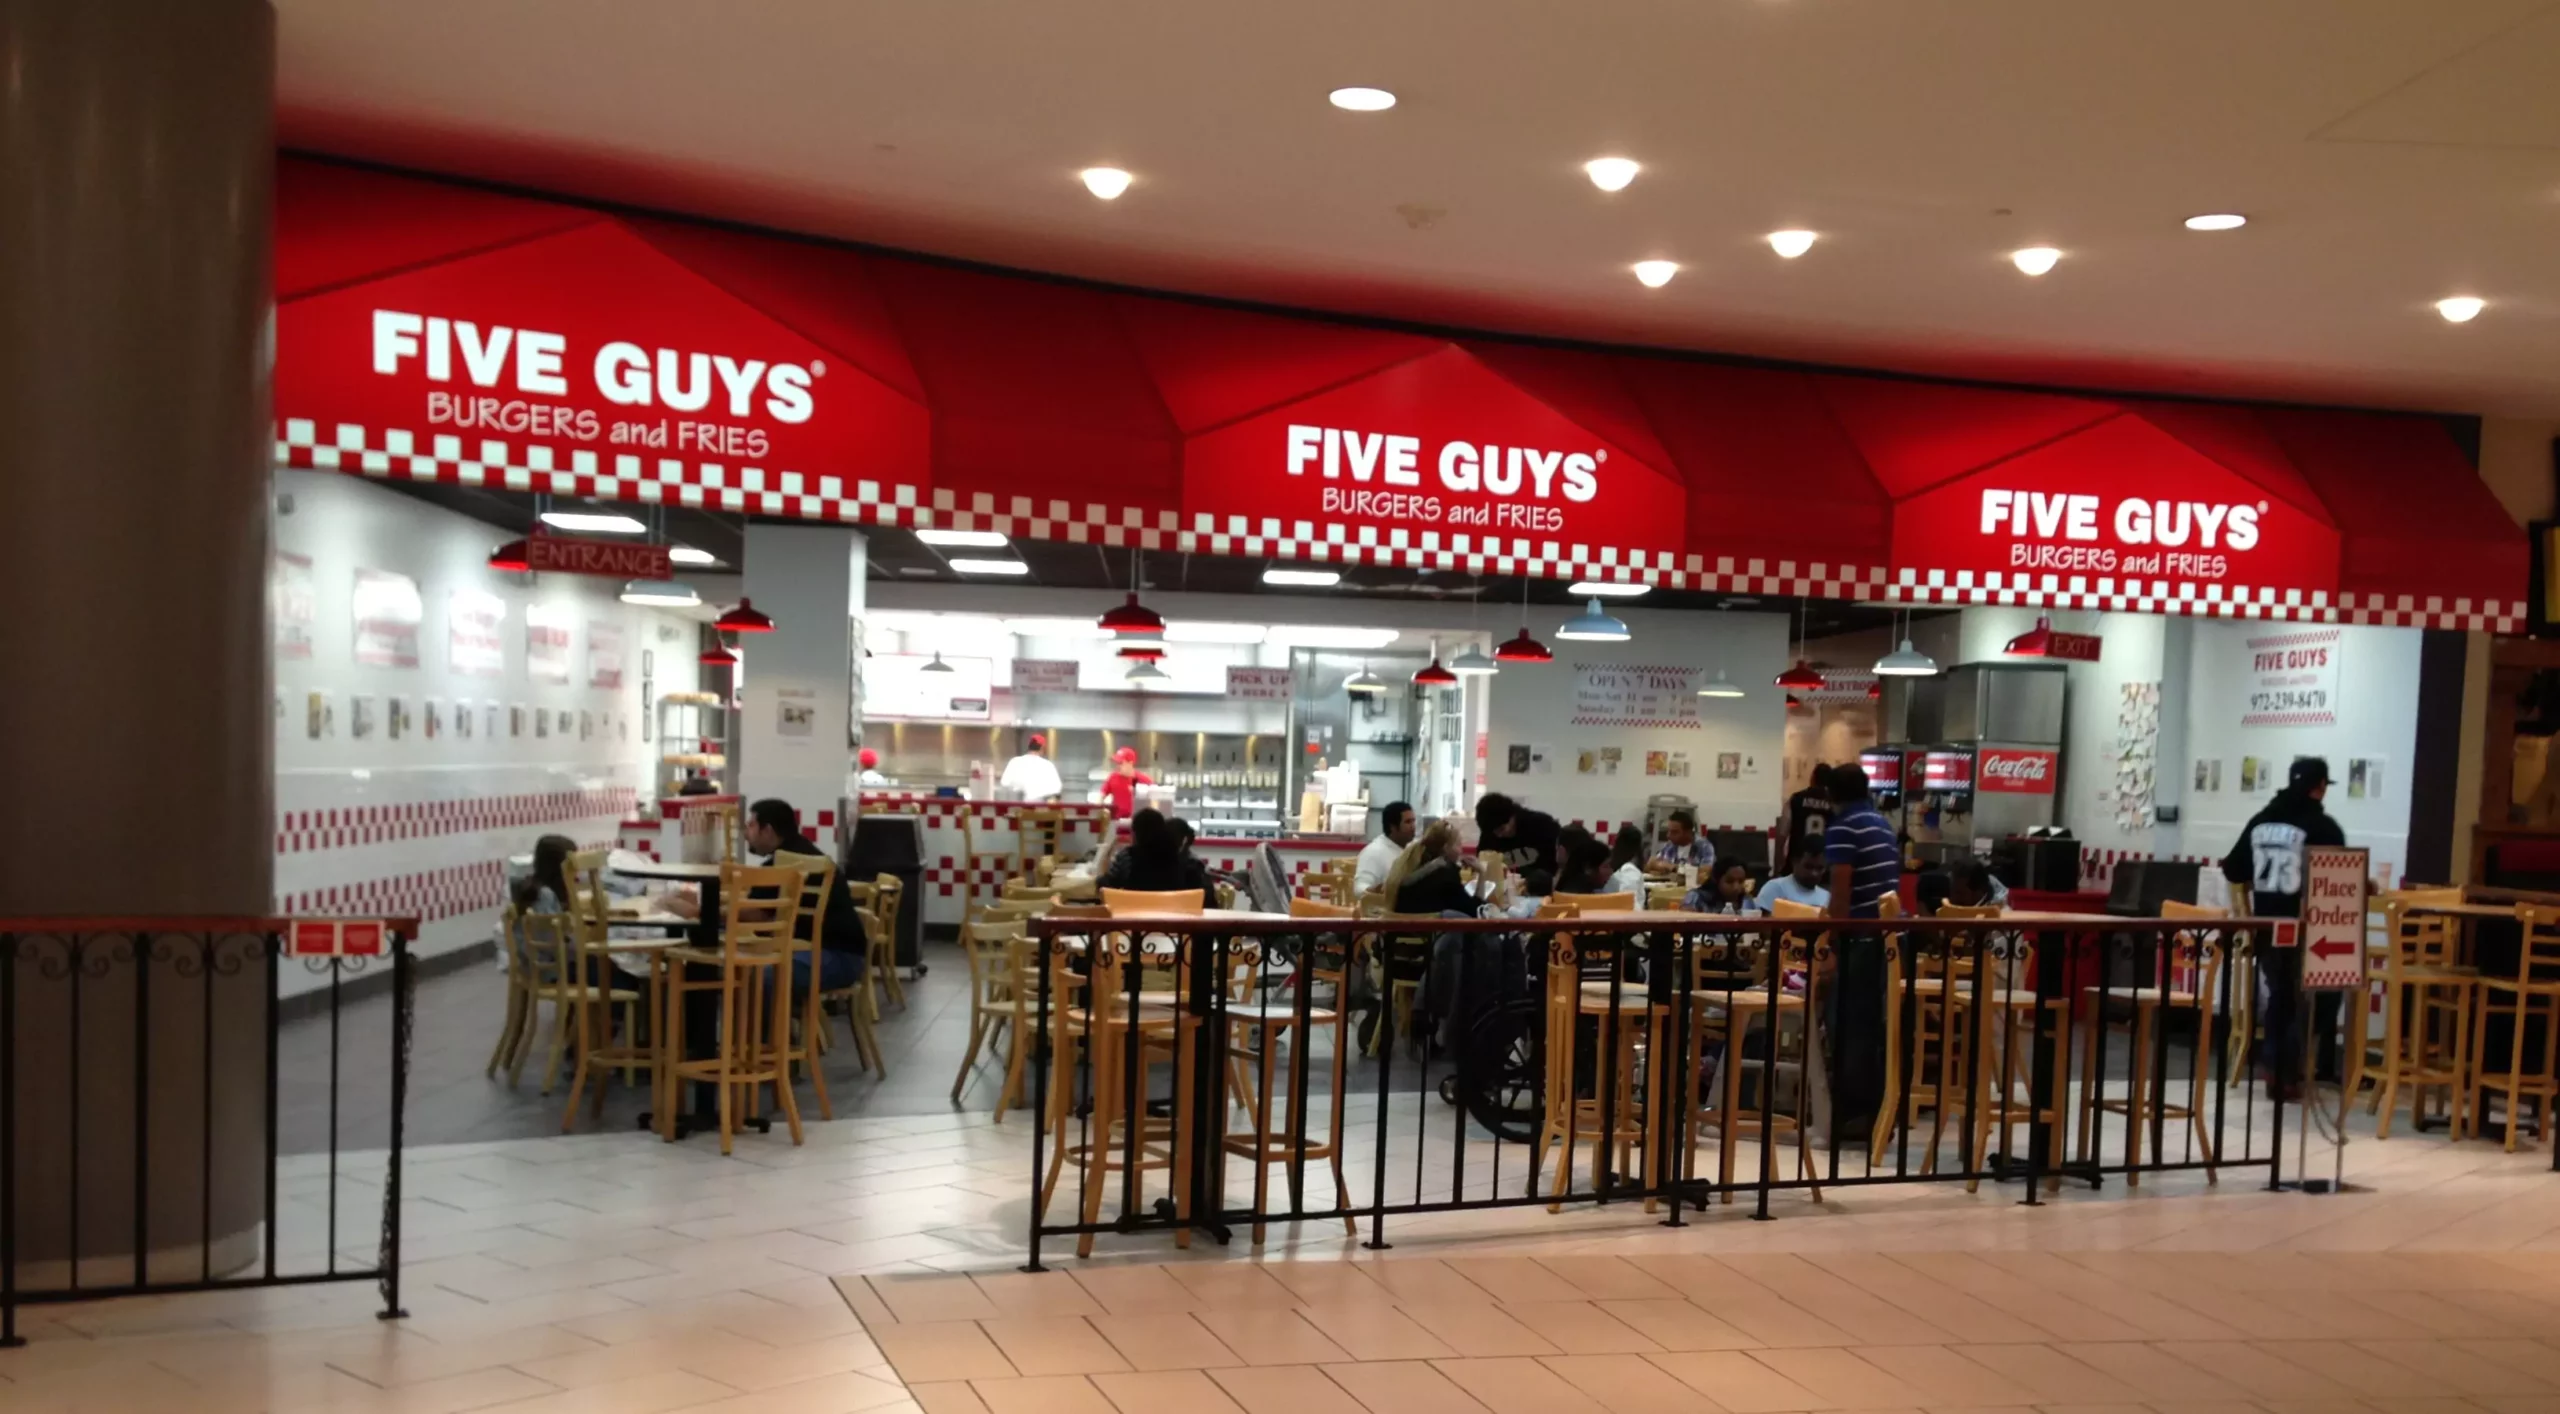 www.Fiveguys.comSurvey Validation code